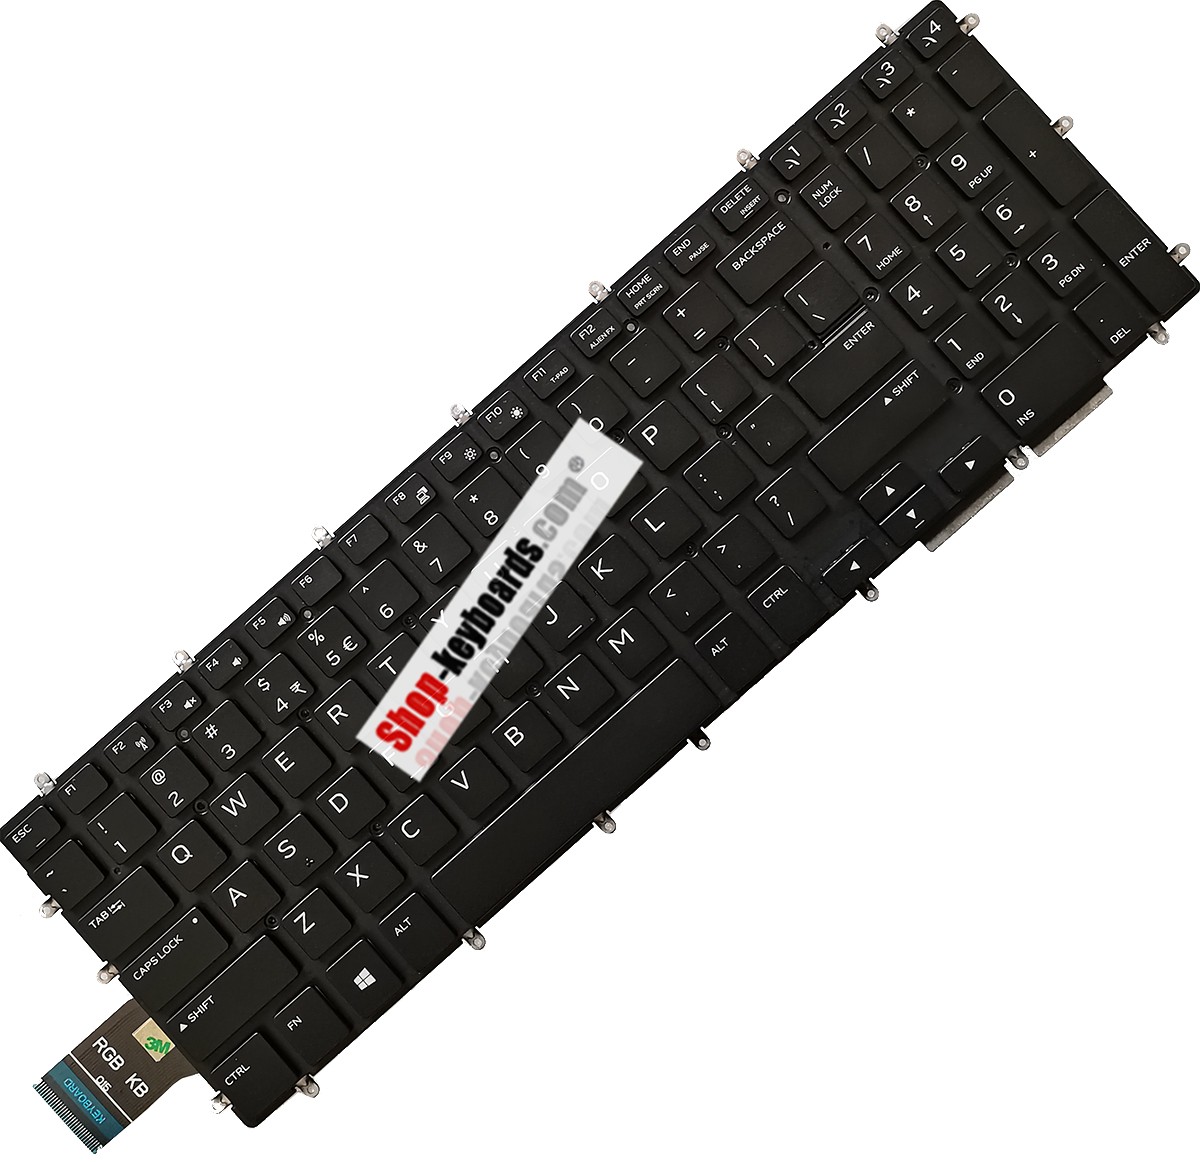 Dell 0KN4-0H1UK16 Keyboard replacement